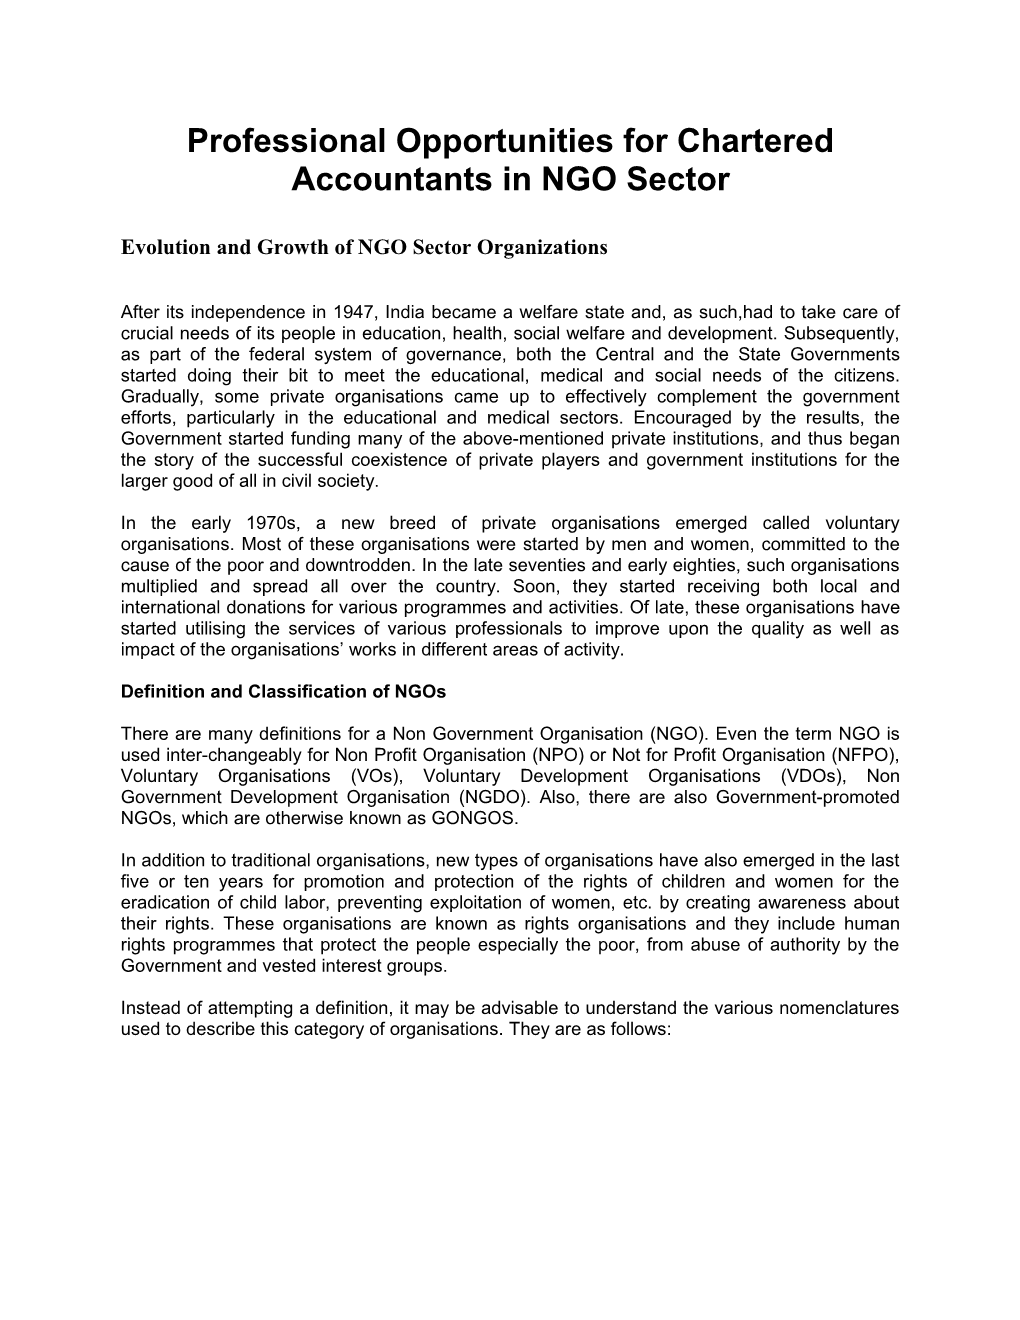 Professional Opportunities for Chartered Accountants in NGO Sector